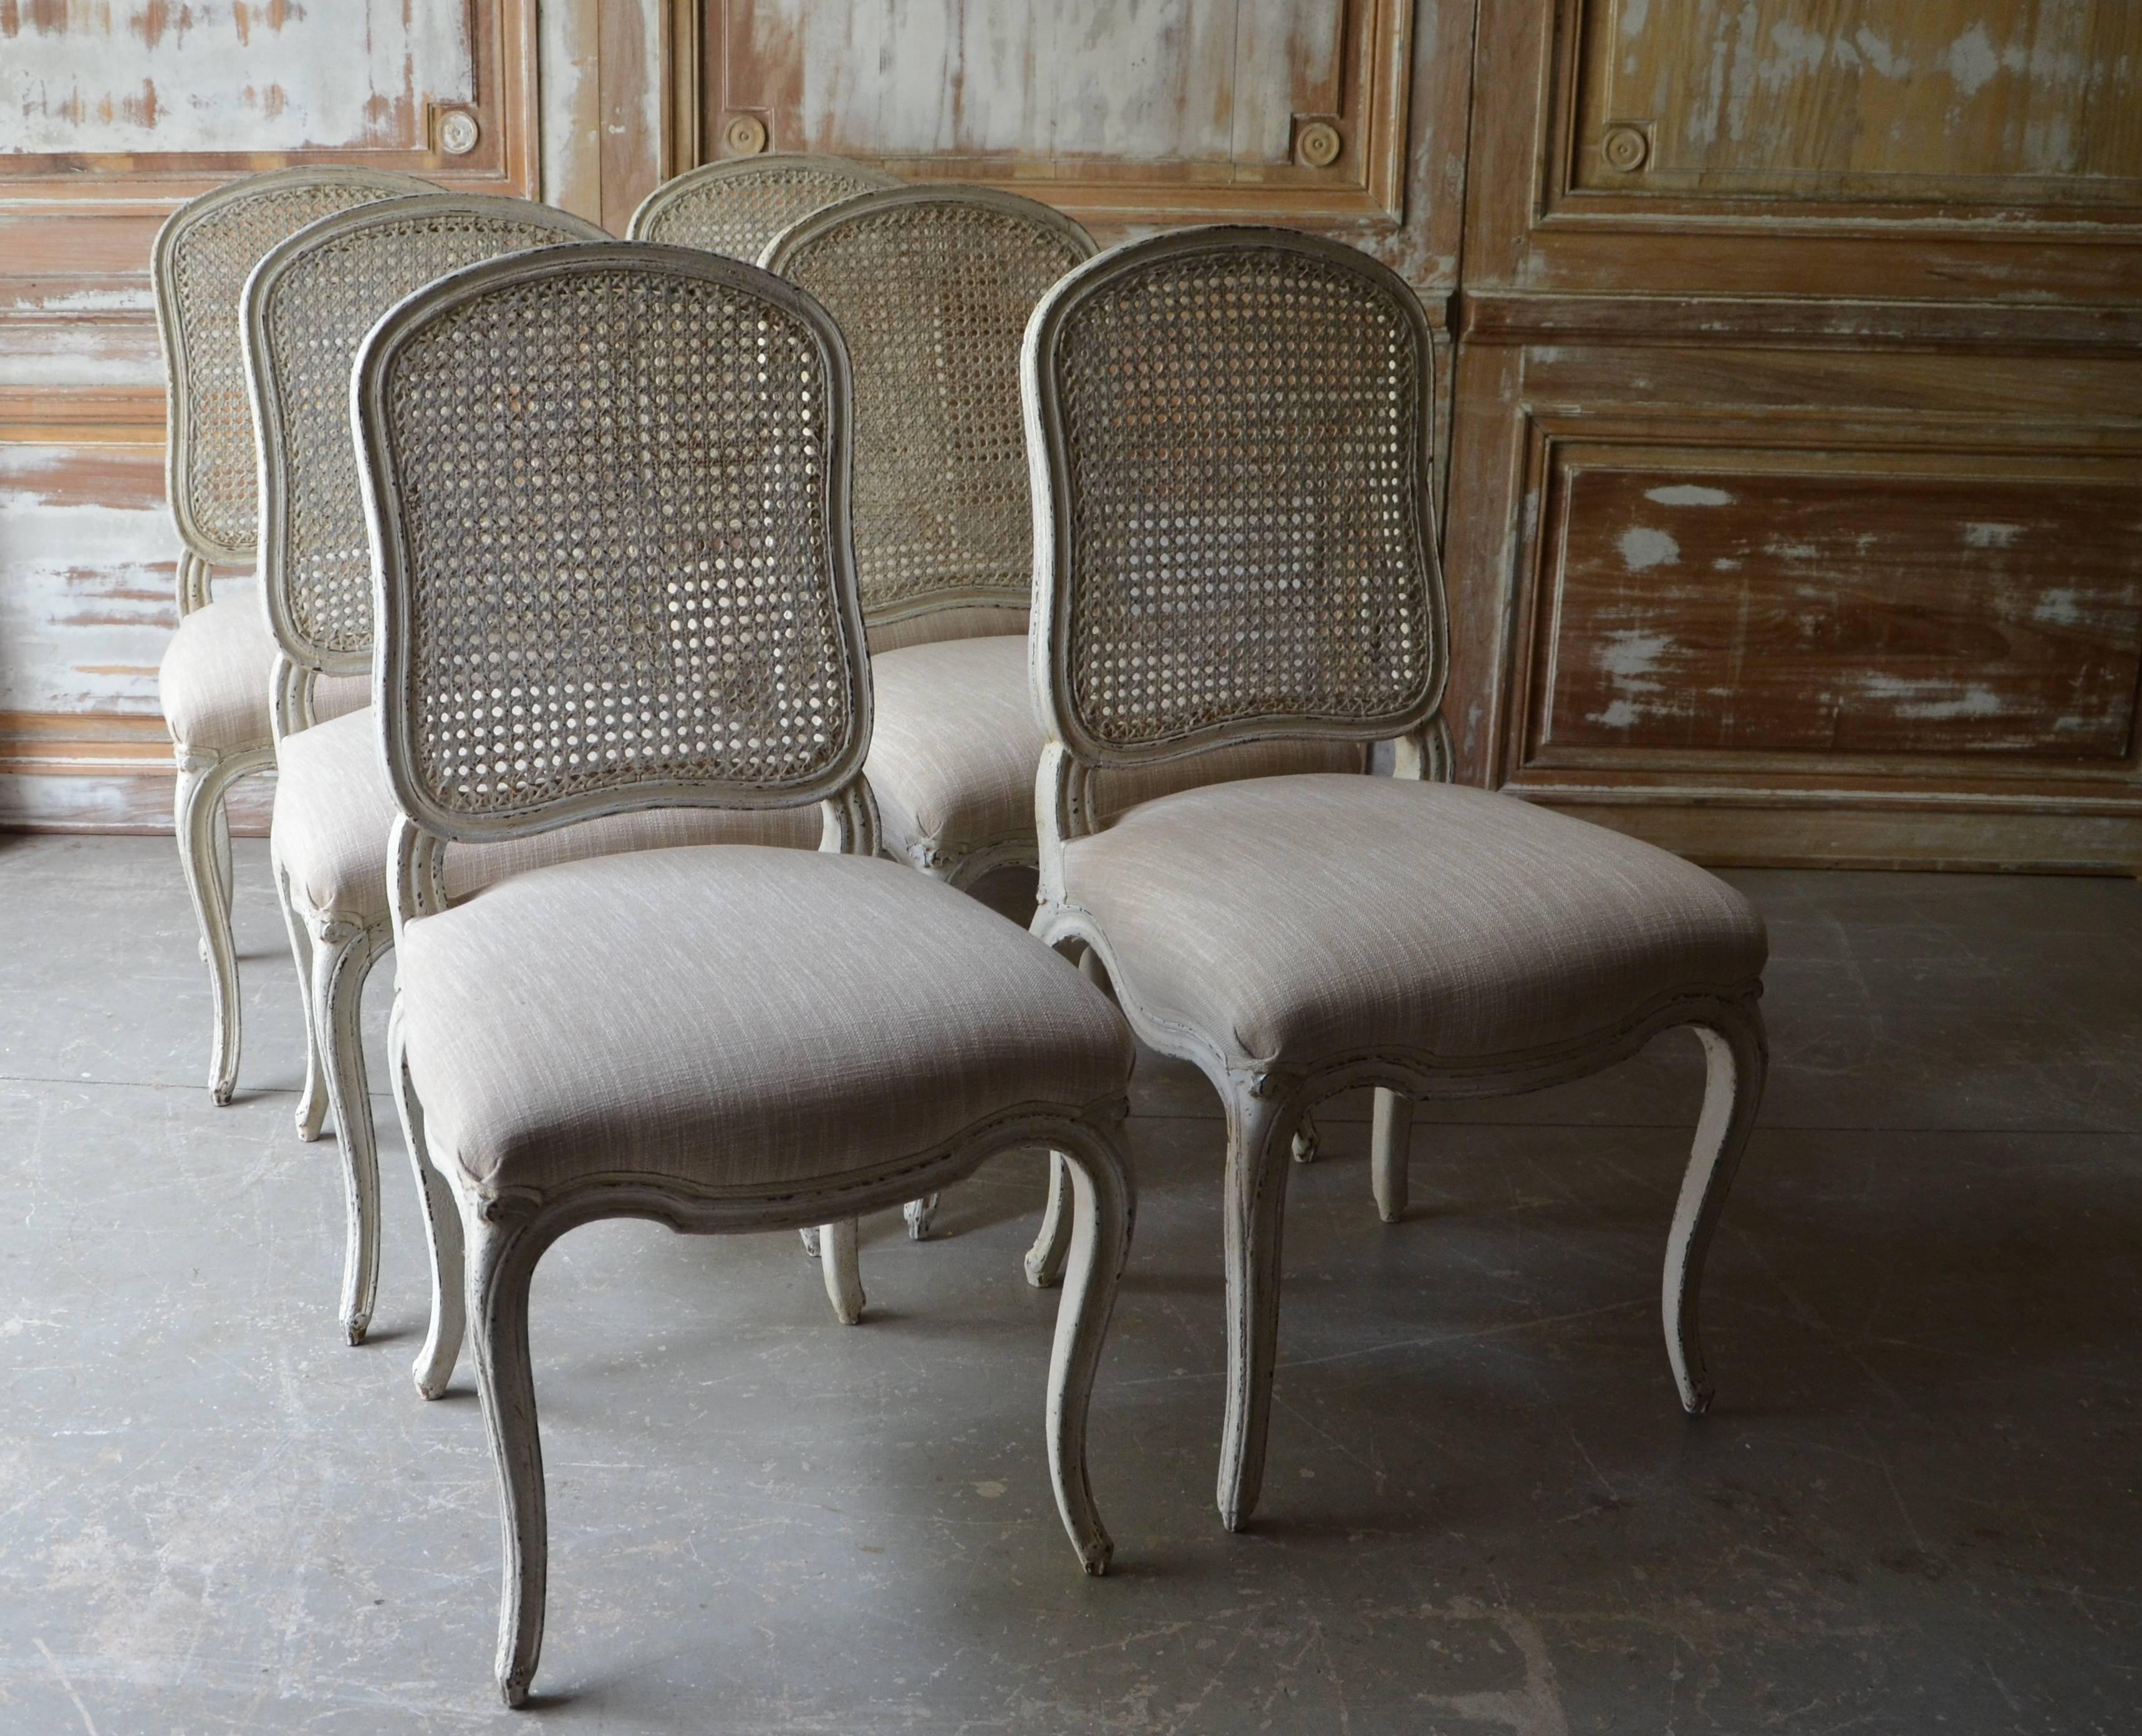 Set of French chairs Louis XV style with flat back called “la Reine” is caned and scalloped frieze carved and raised on cabriole legs. Upholstered in very light cream/white linen with classical decorative gimp trim. Very elegant as well as